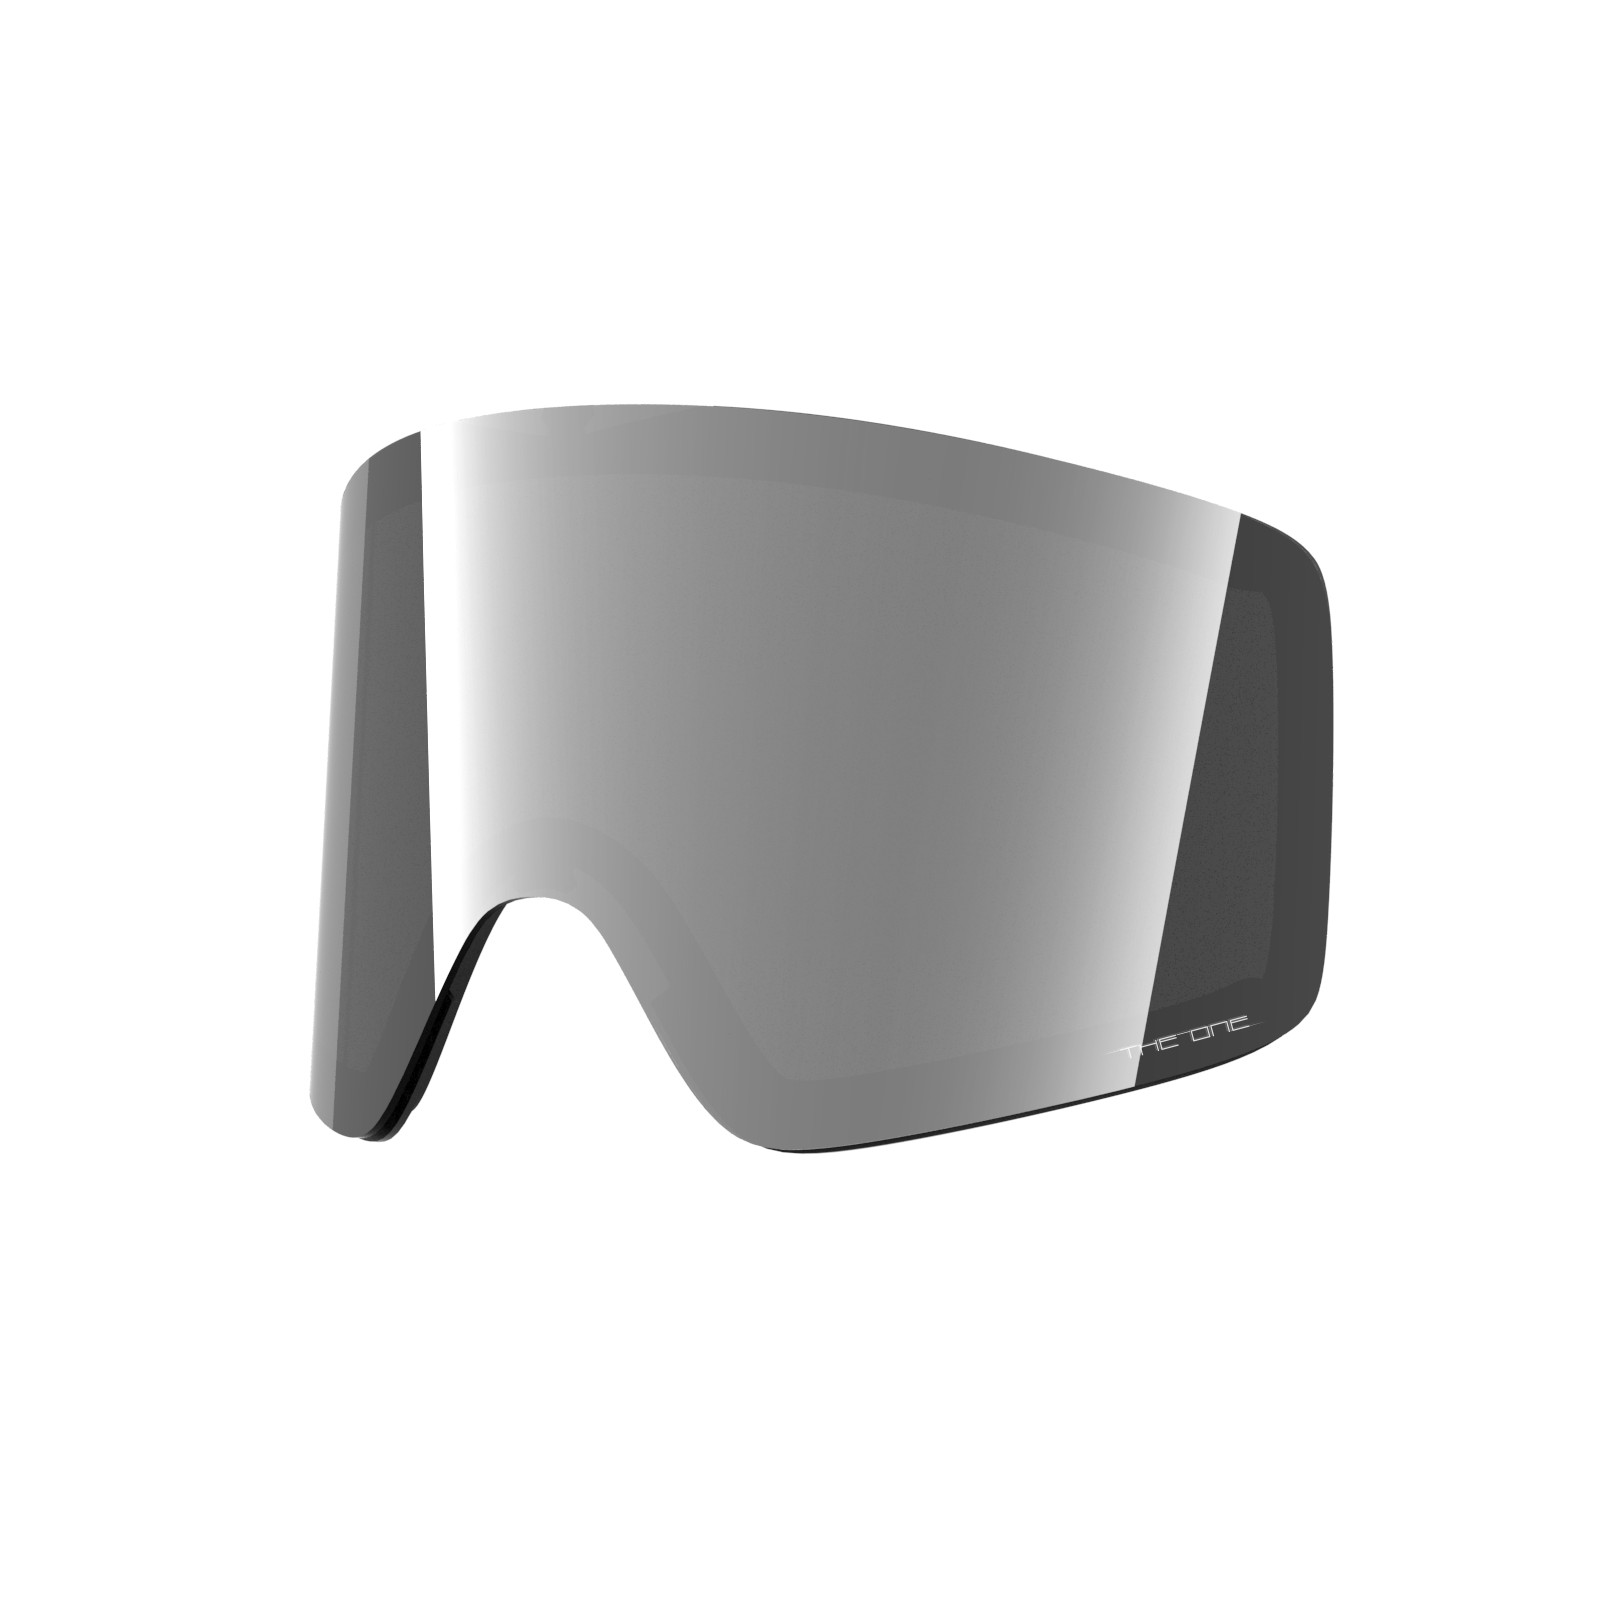 Silver lens for Void goggle